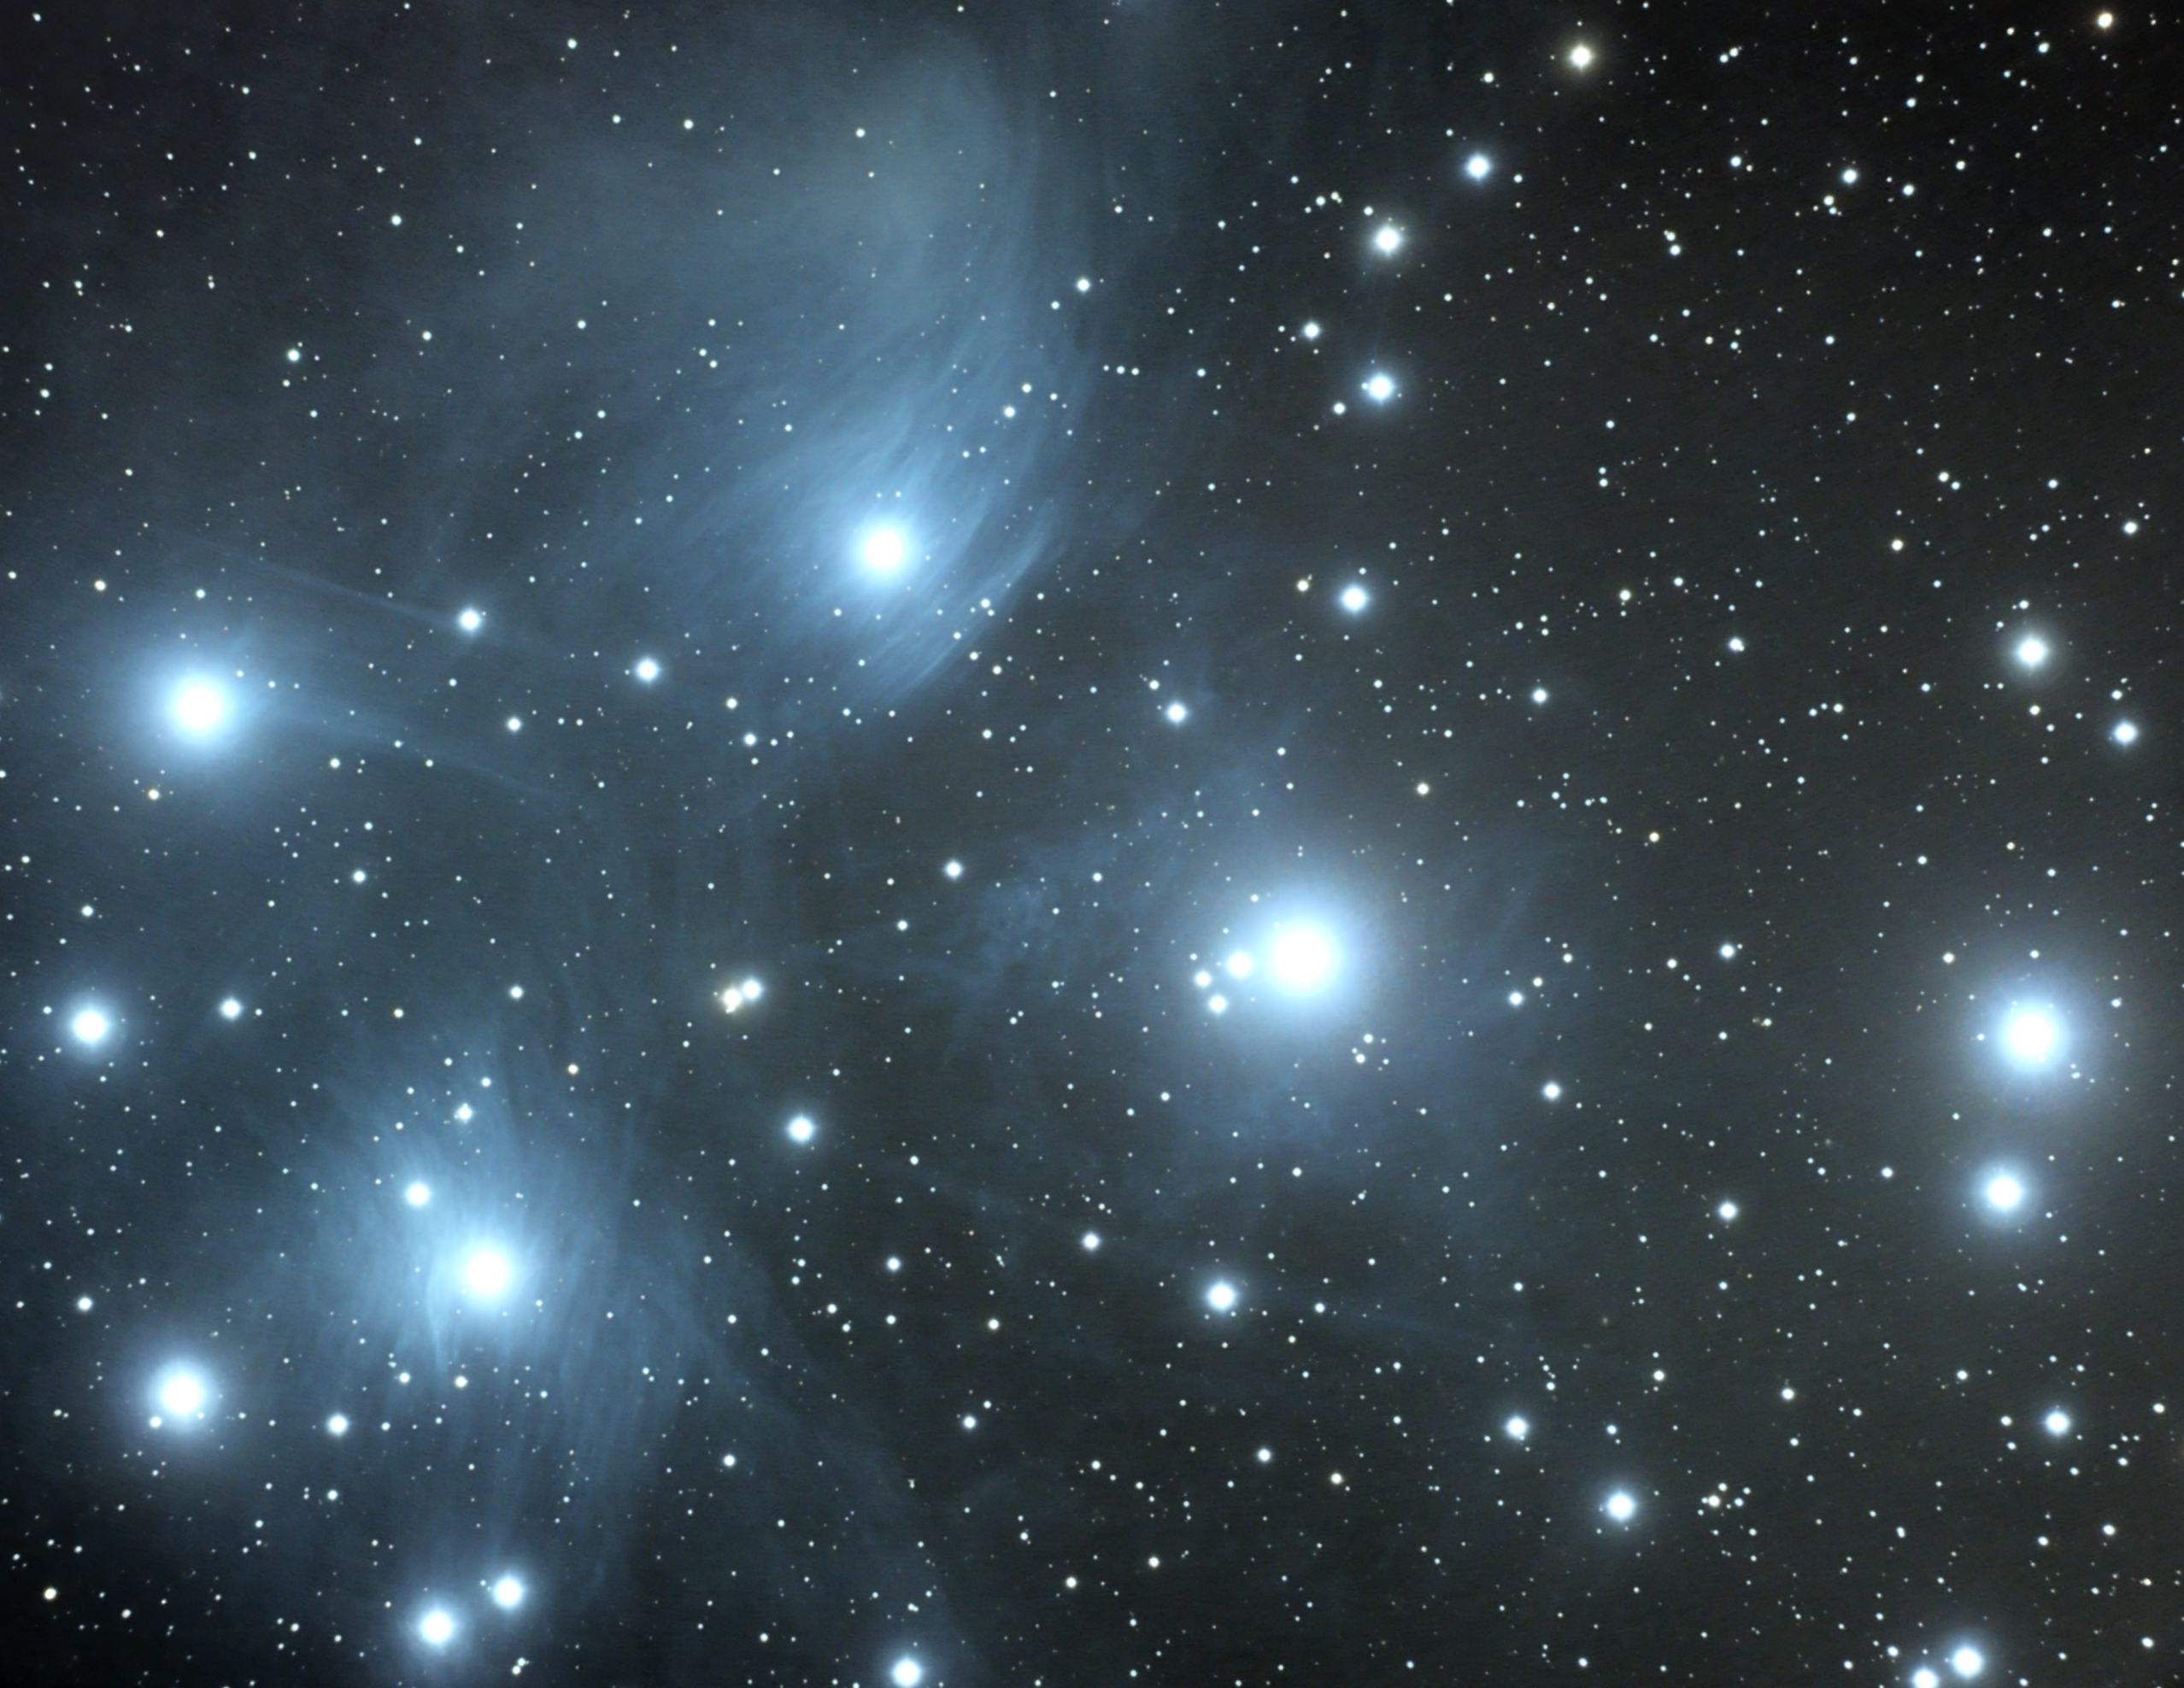 Pleiades or Seven Sisters